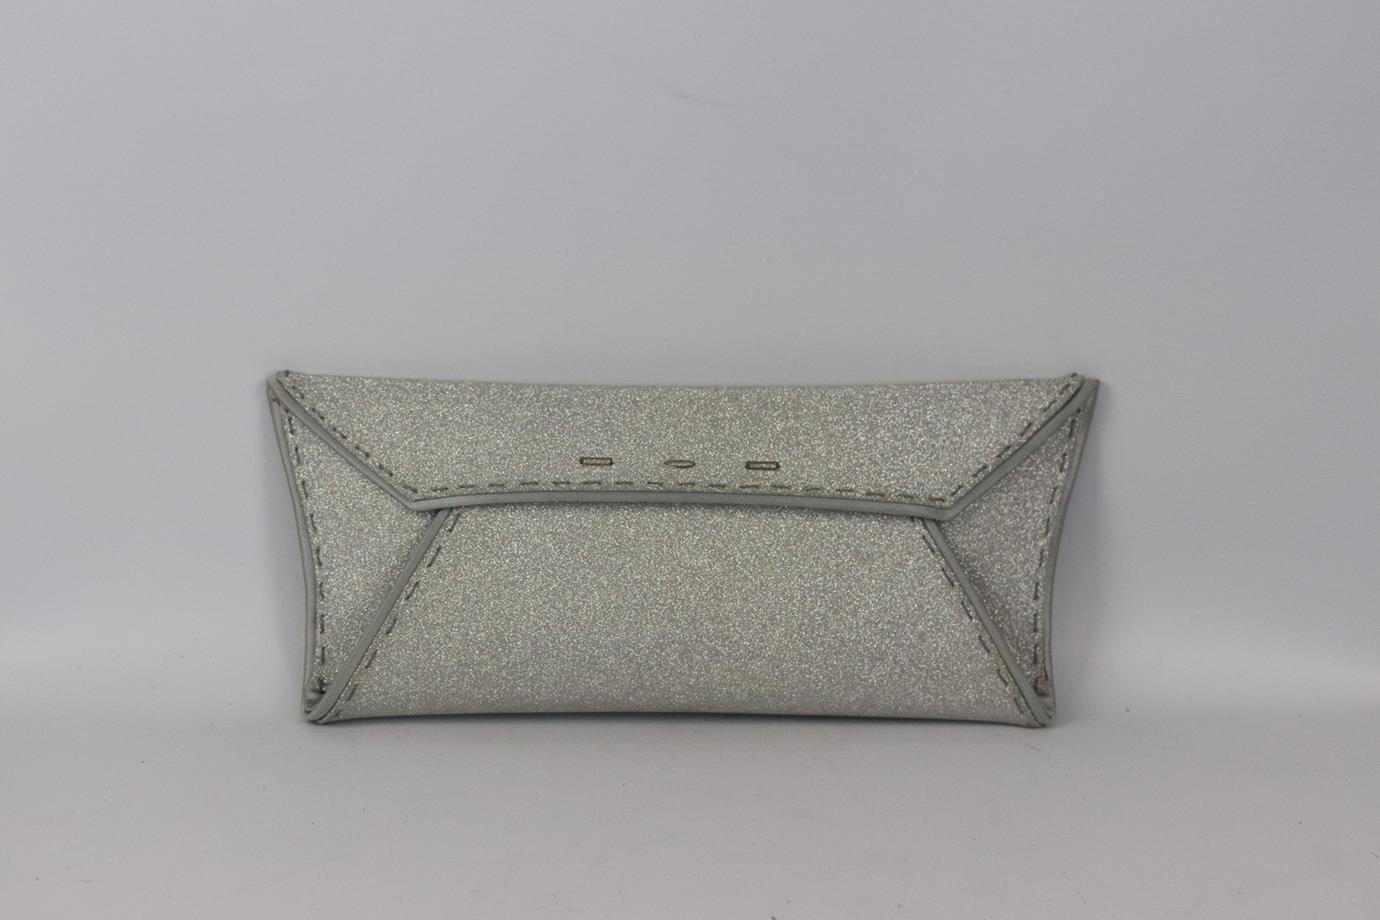 VBH SATIN TRIMMED GLITTERED FAUX LEATHER CLUTCH